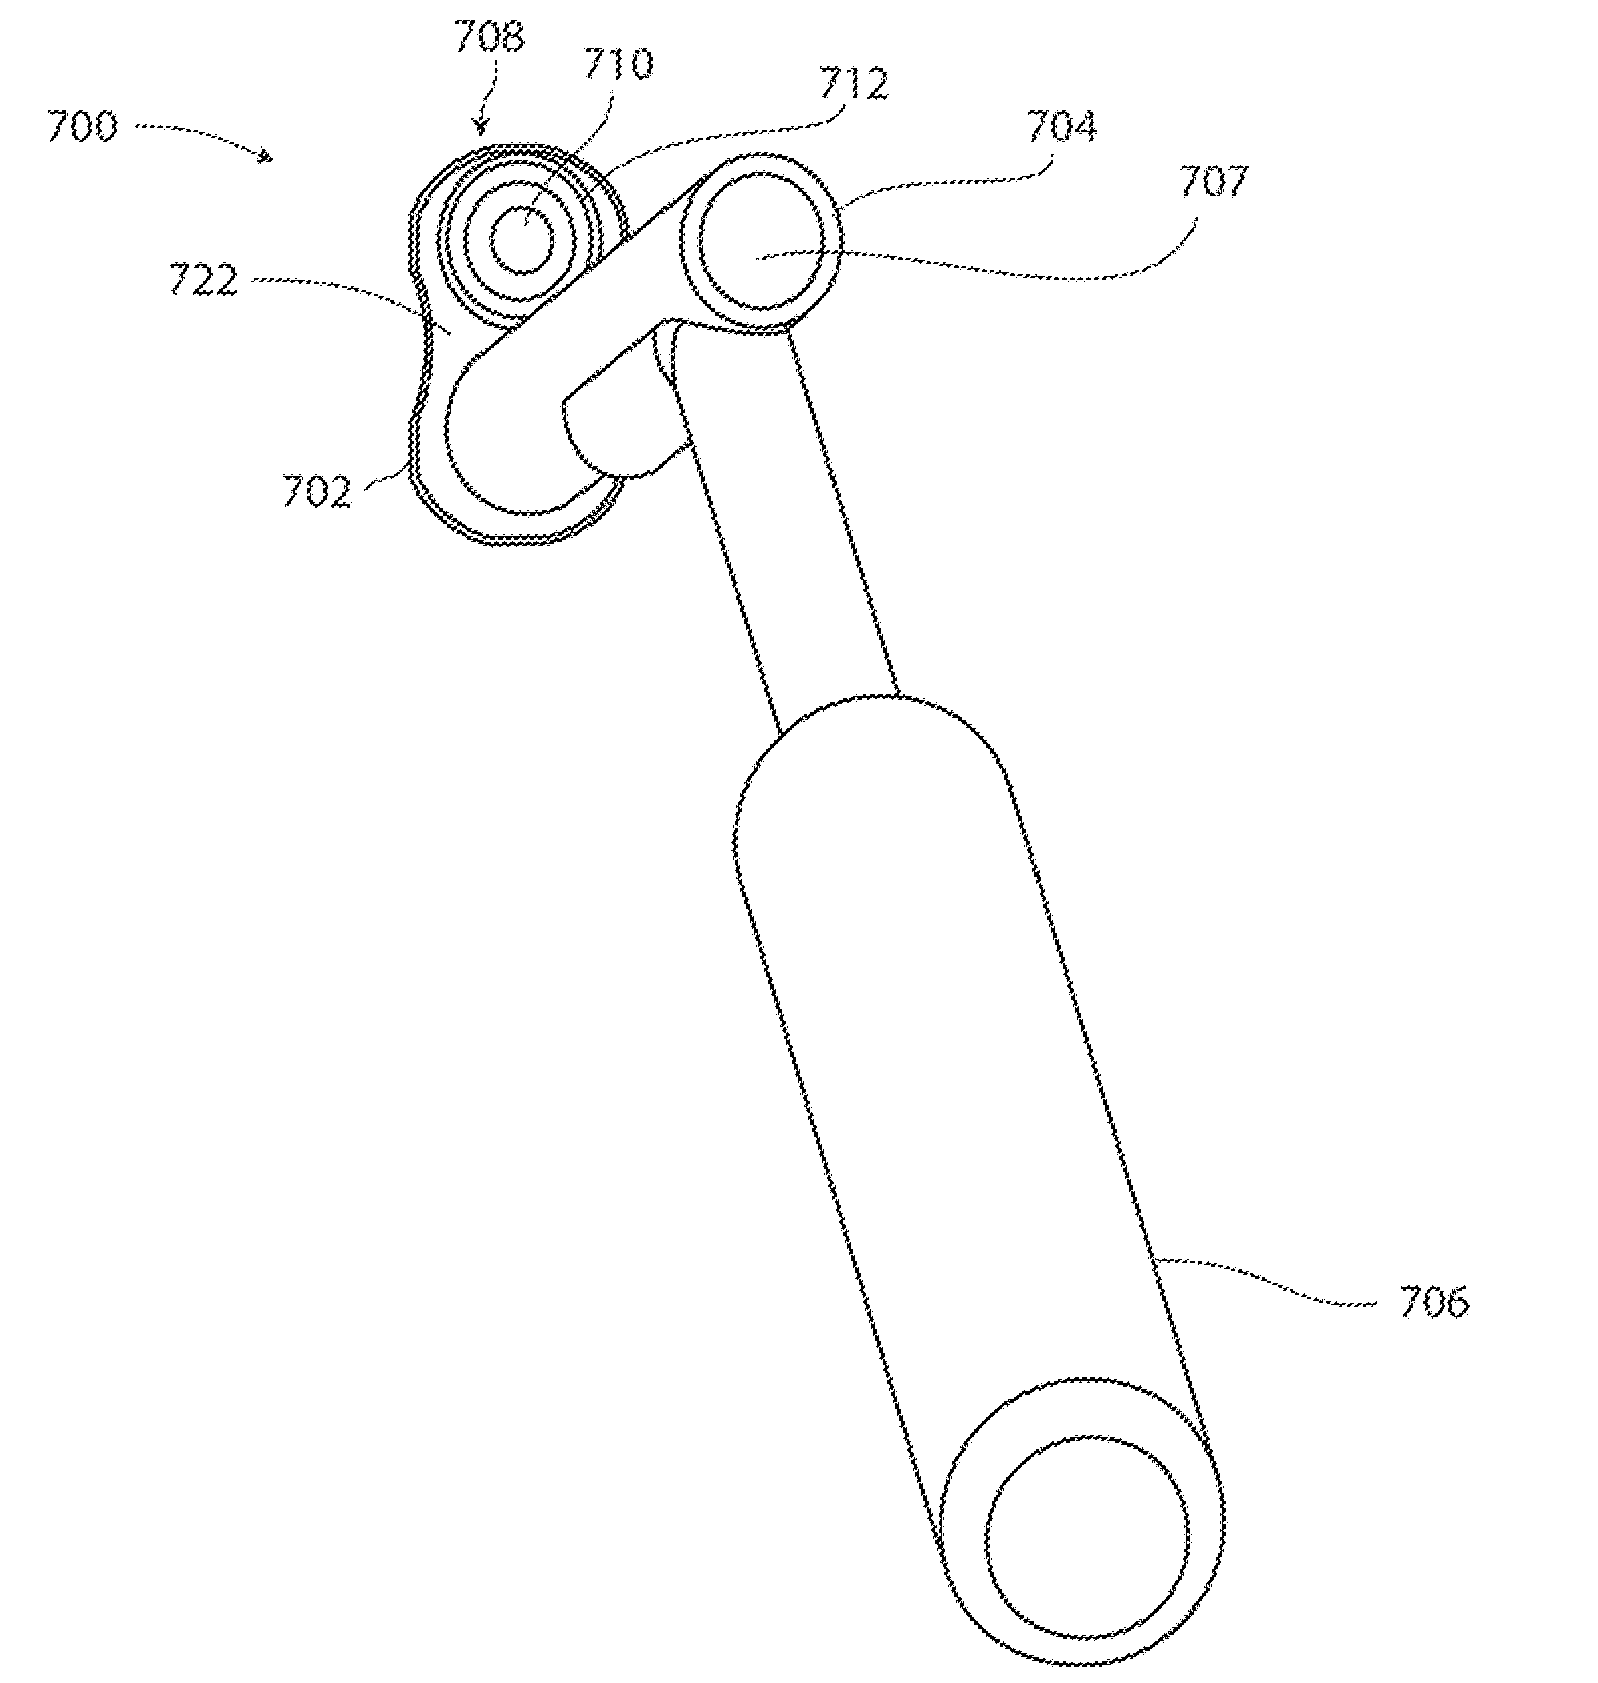 Transcorporeal spinal decompression and repair systems and related methods